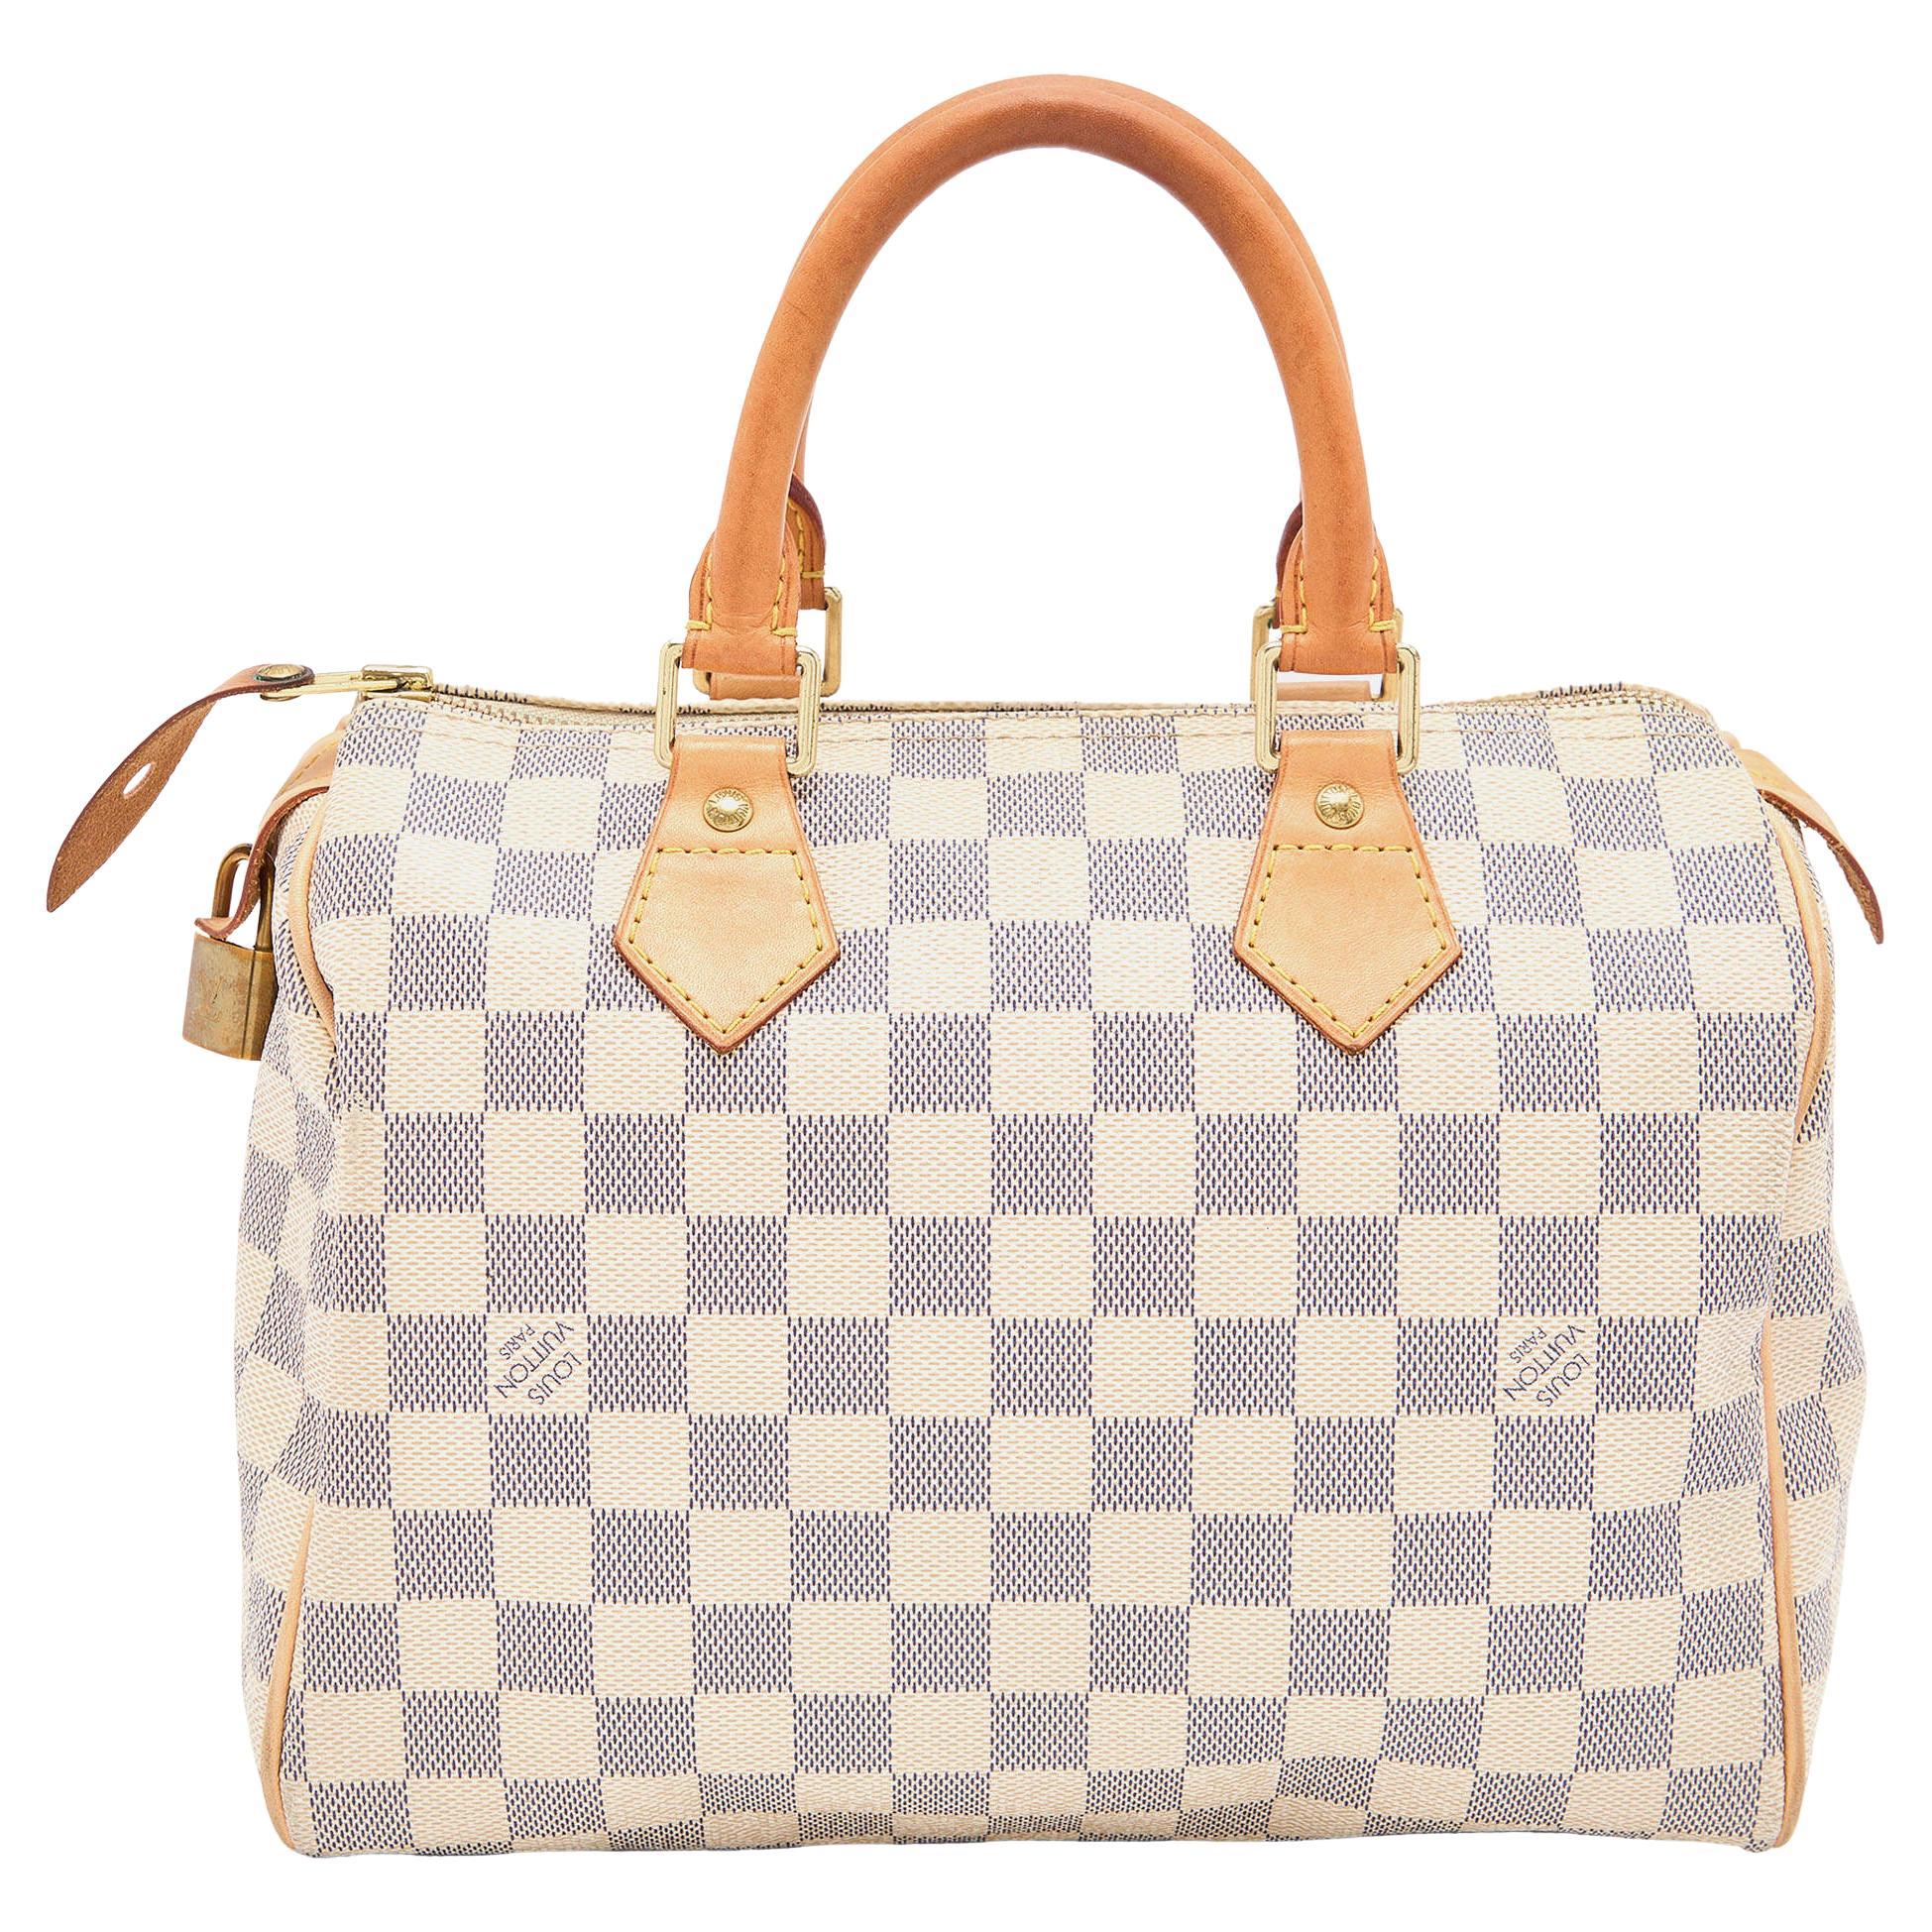 Louis Vuitton Speedy Patchwork - 2 For Sale on 1stDibs